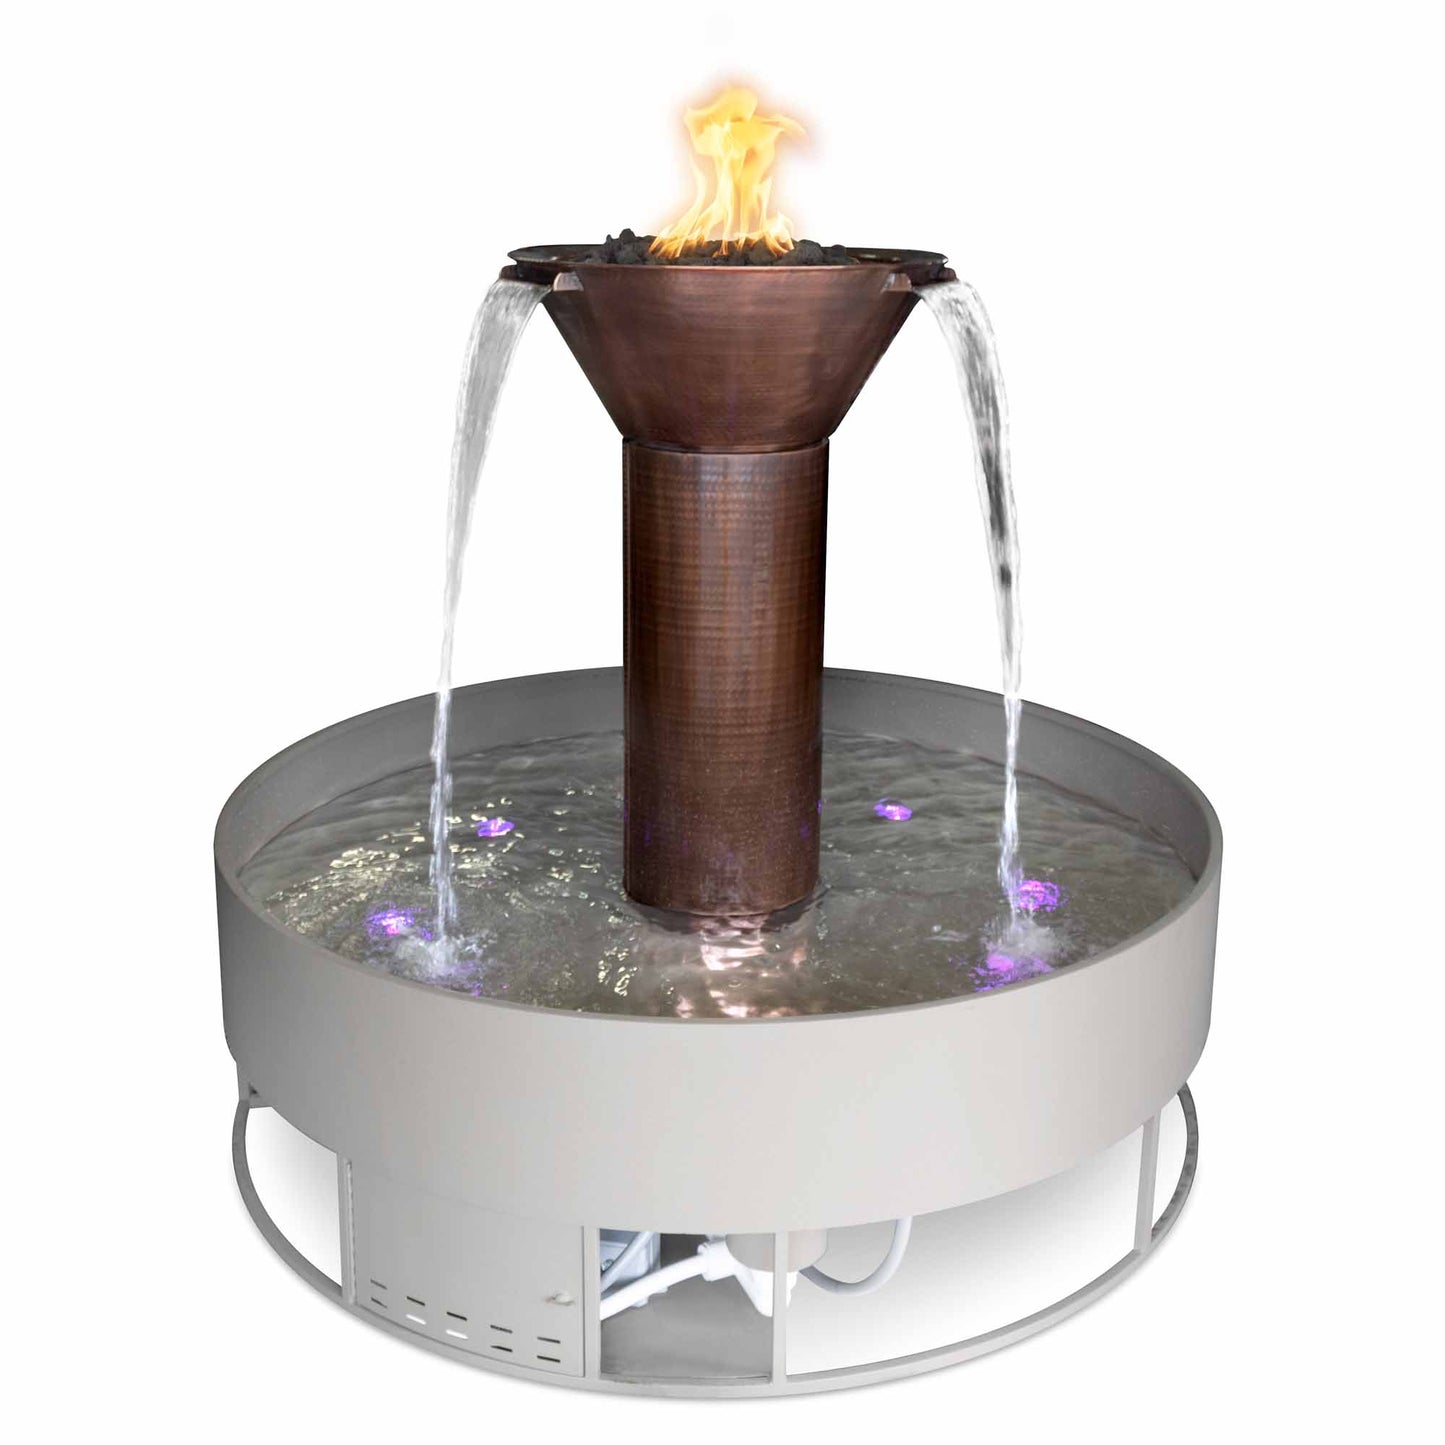 72" Round Olympian Fire and Water Fountain - 3 Way Spill - Match